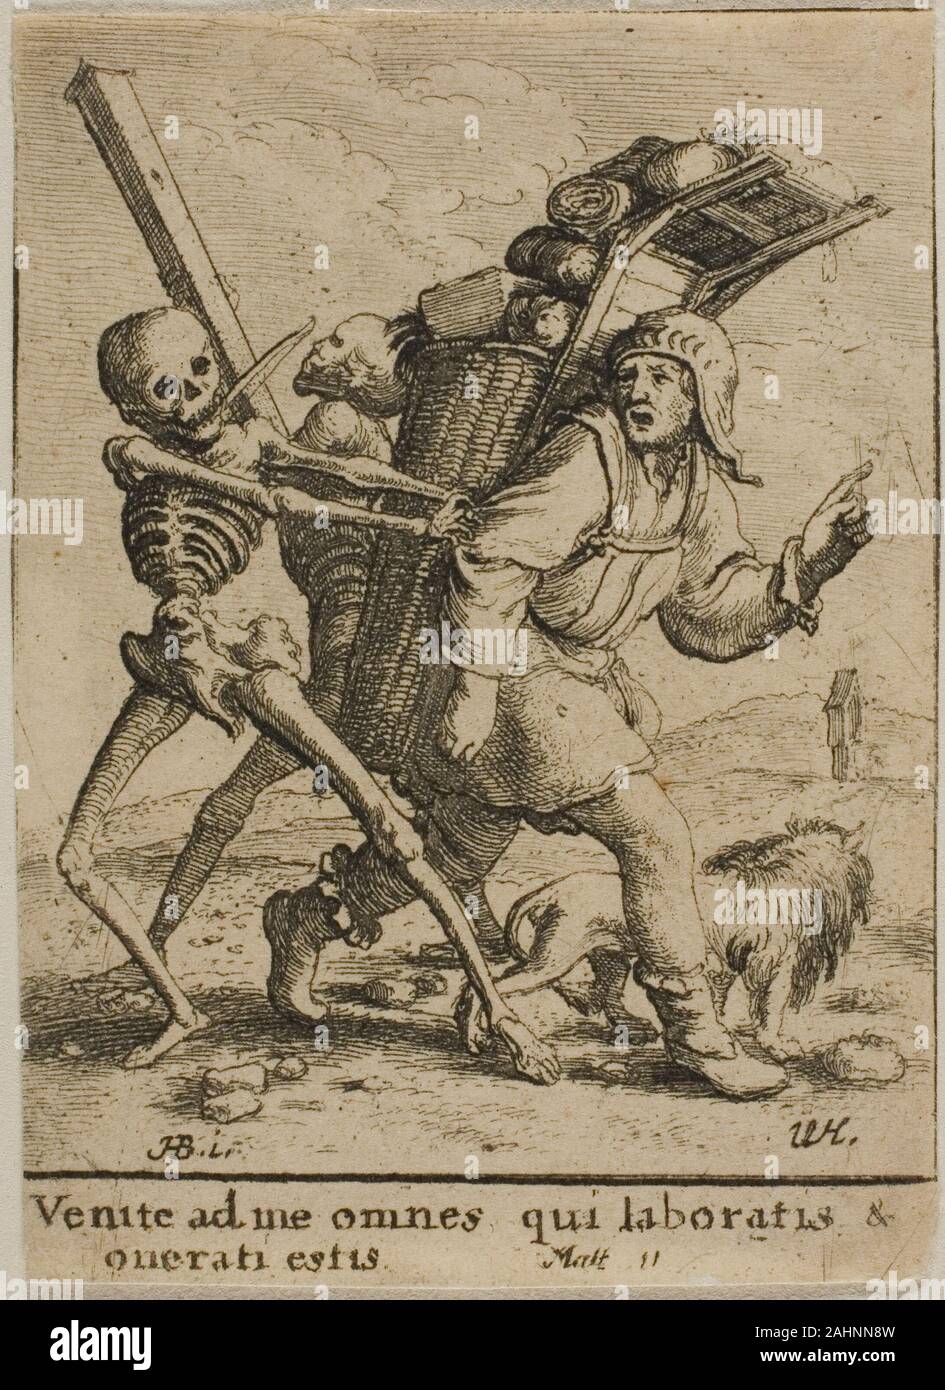 Wenceslaus Hollar. The Peddlar and Death. 1651. Bohemia. Etching on ivory wove paper Stock Photo